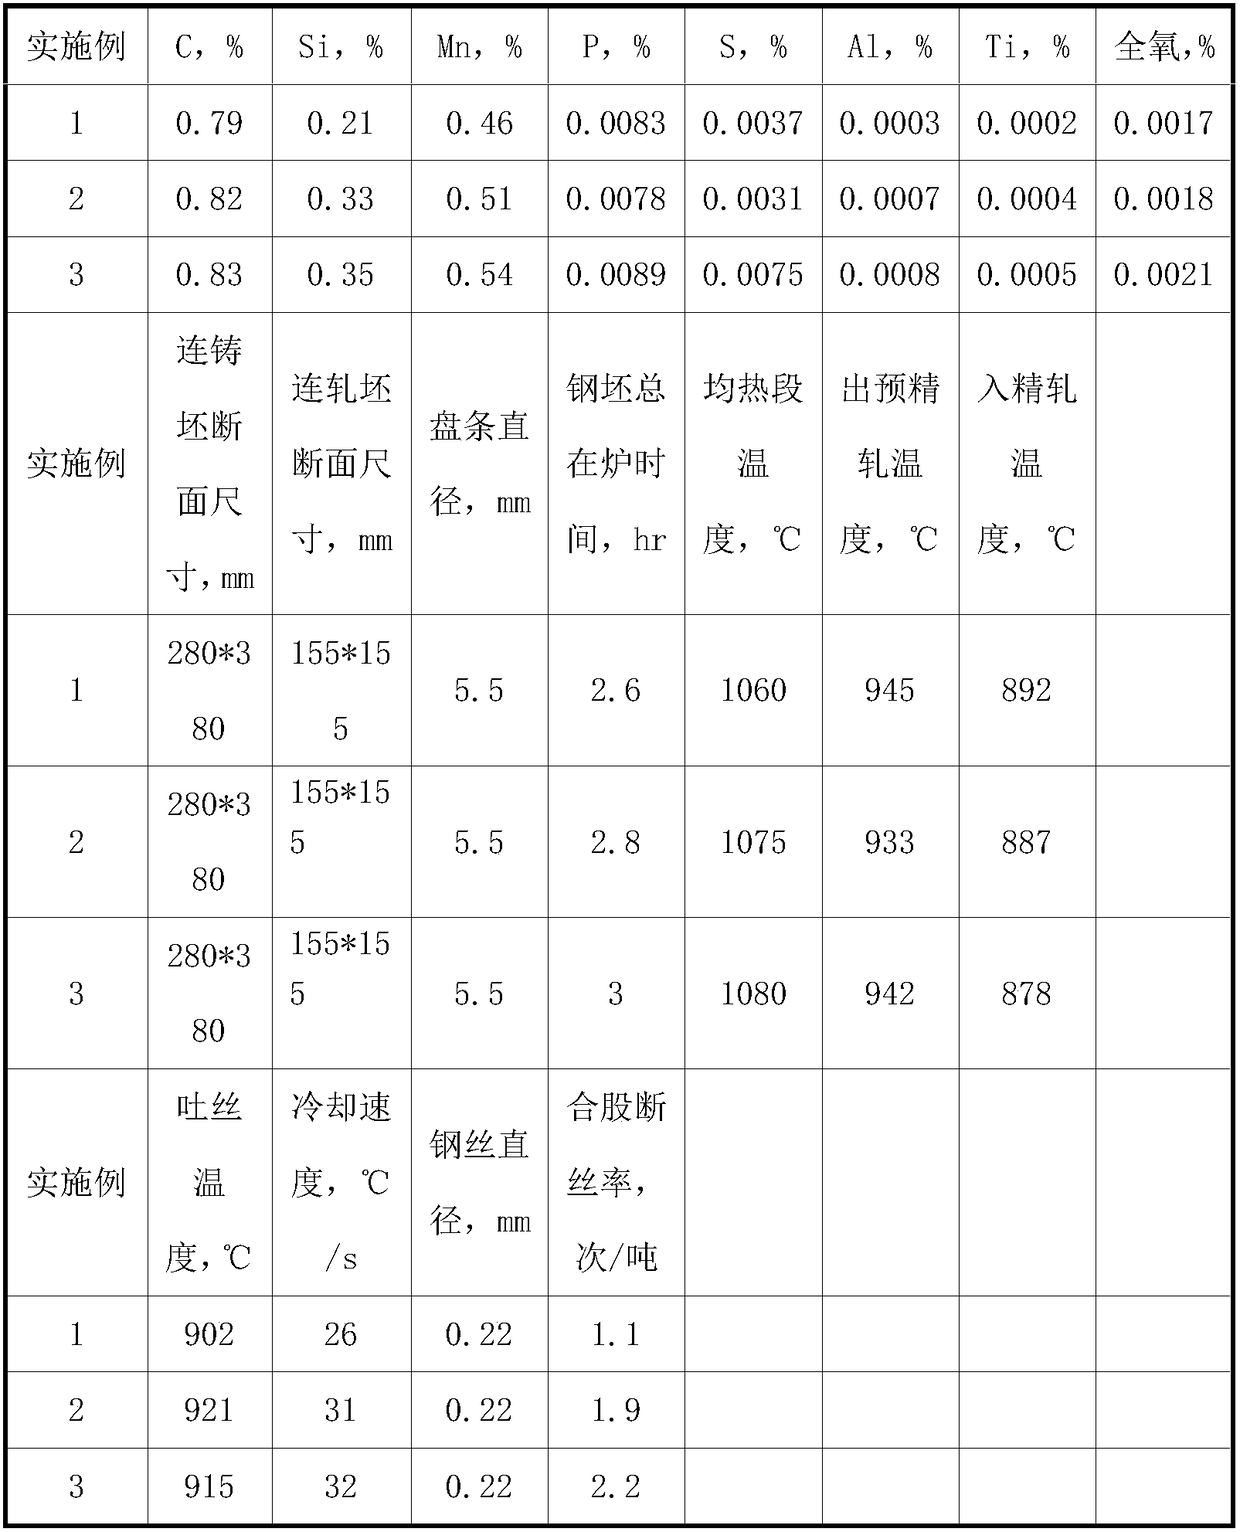 High-carbon steel wire rod low in network cementite precipitation and used for fine wire drawing and production method of high-carbon steel wire rod